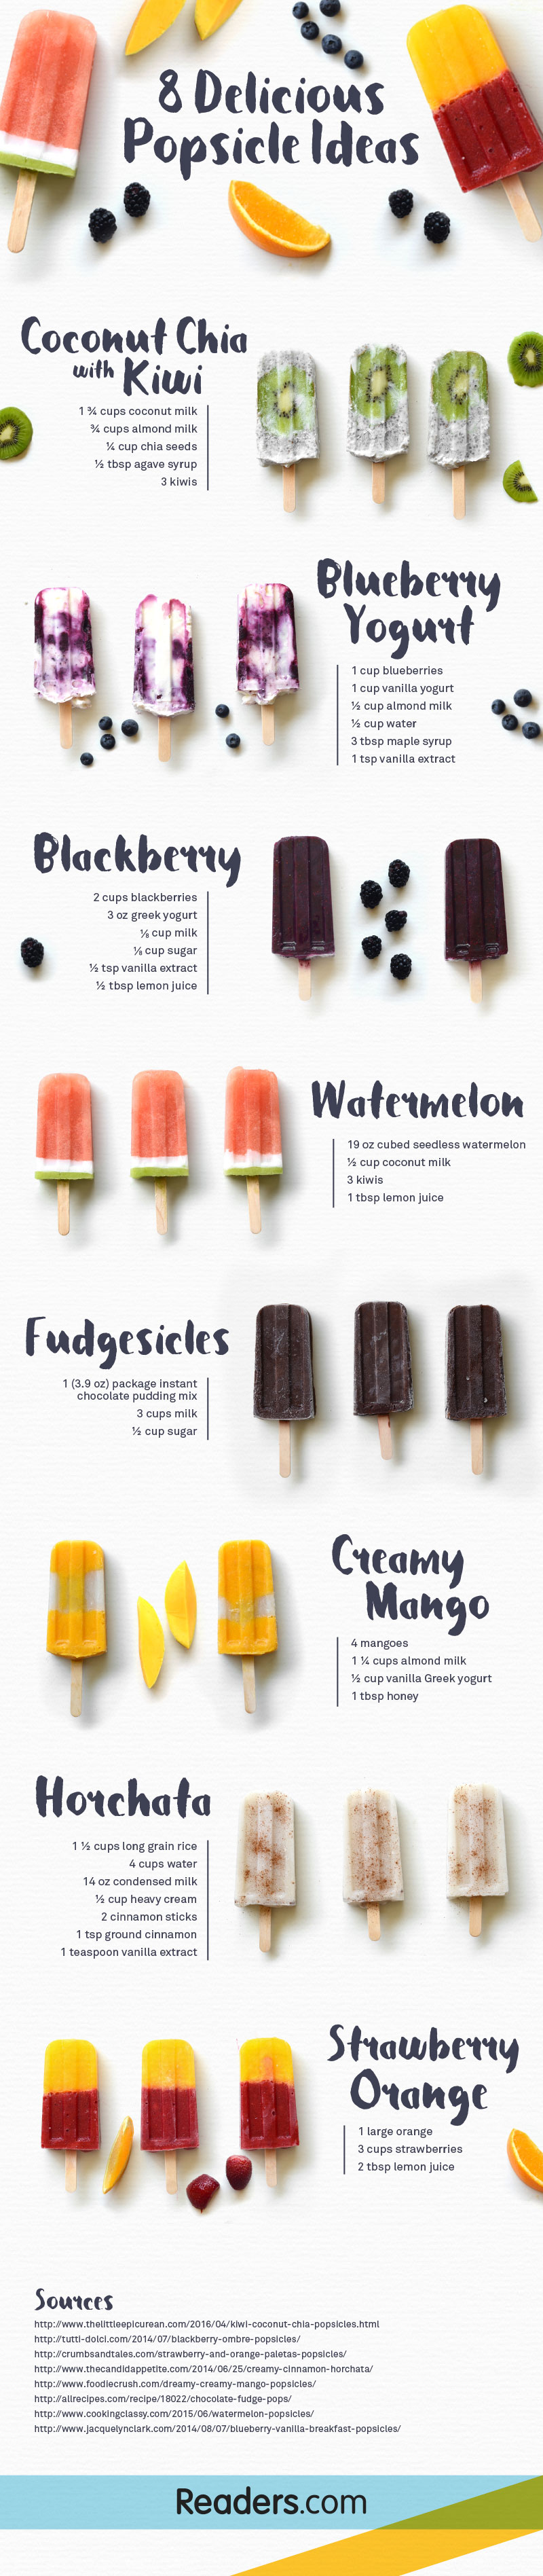 8 Delicious Popsicle Recipes